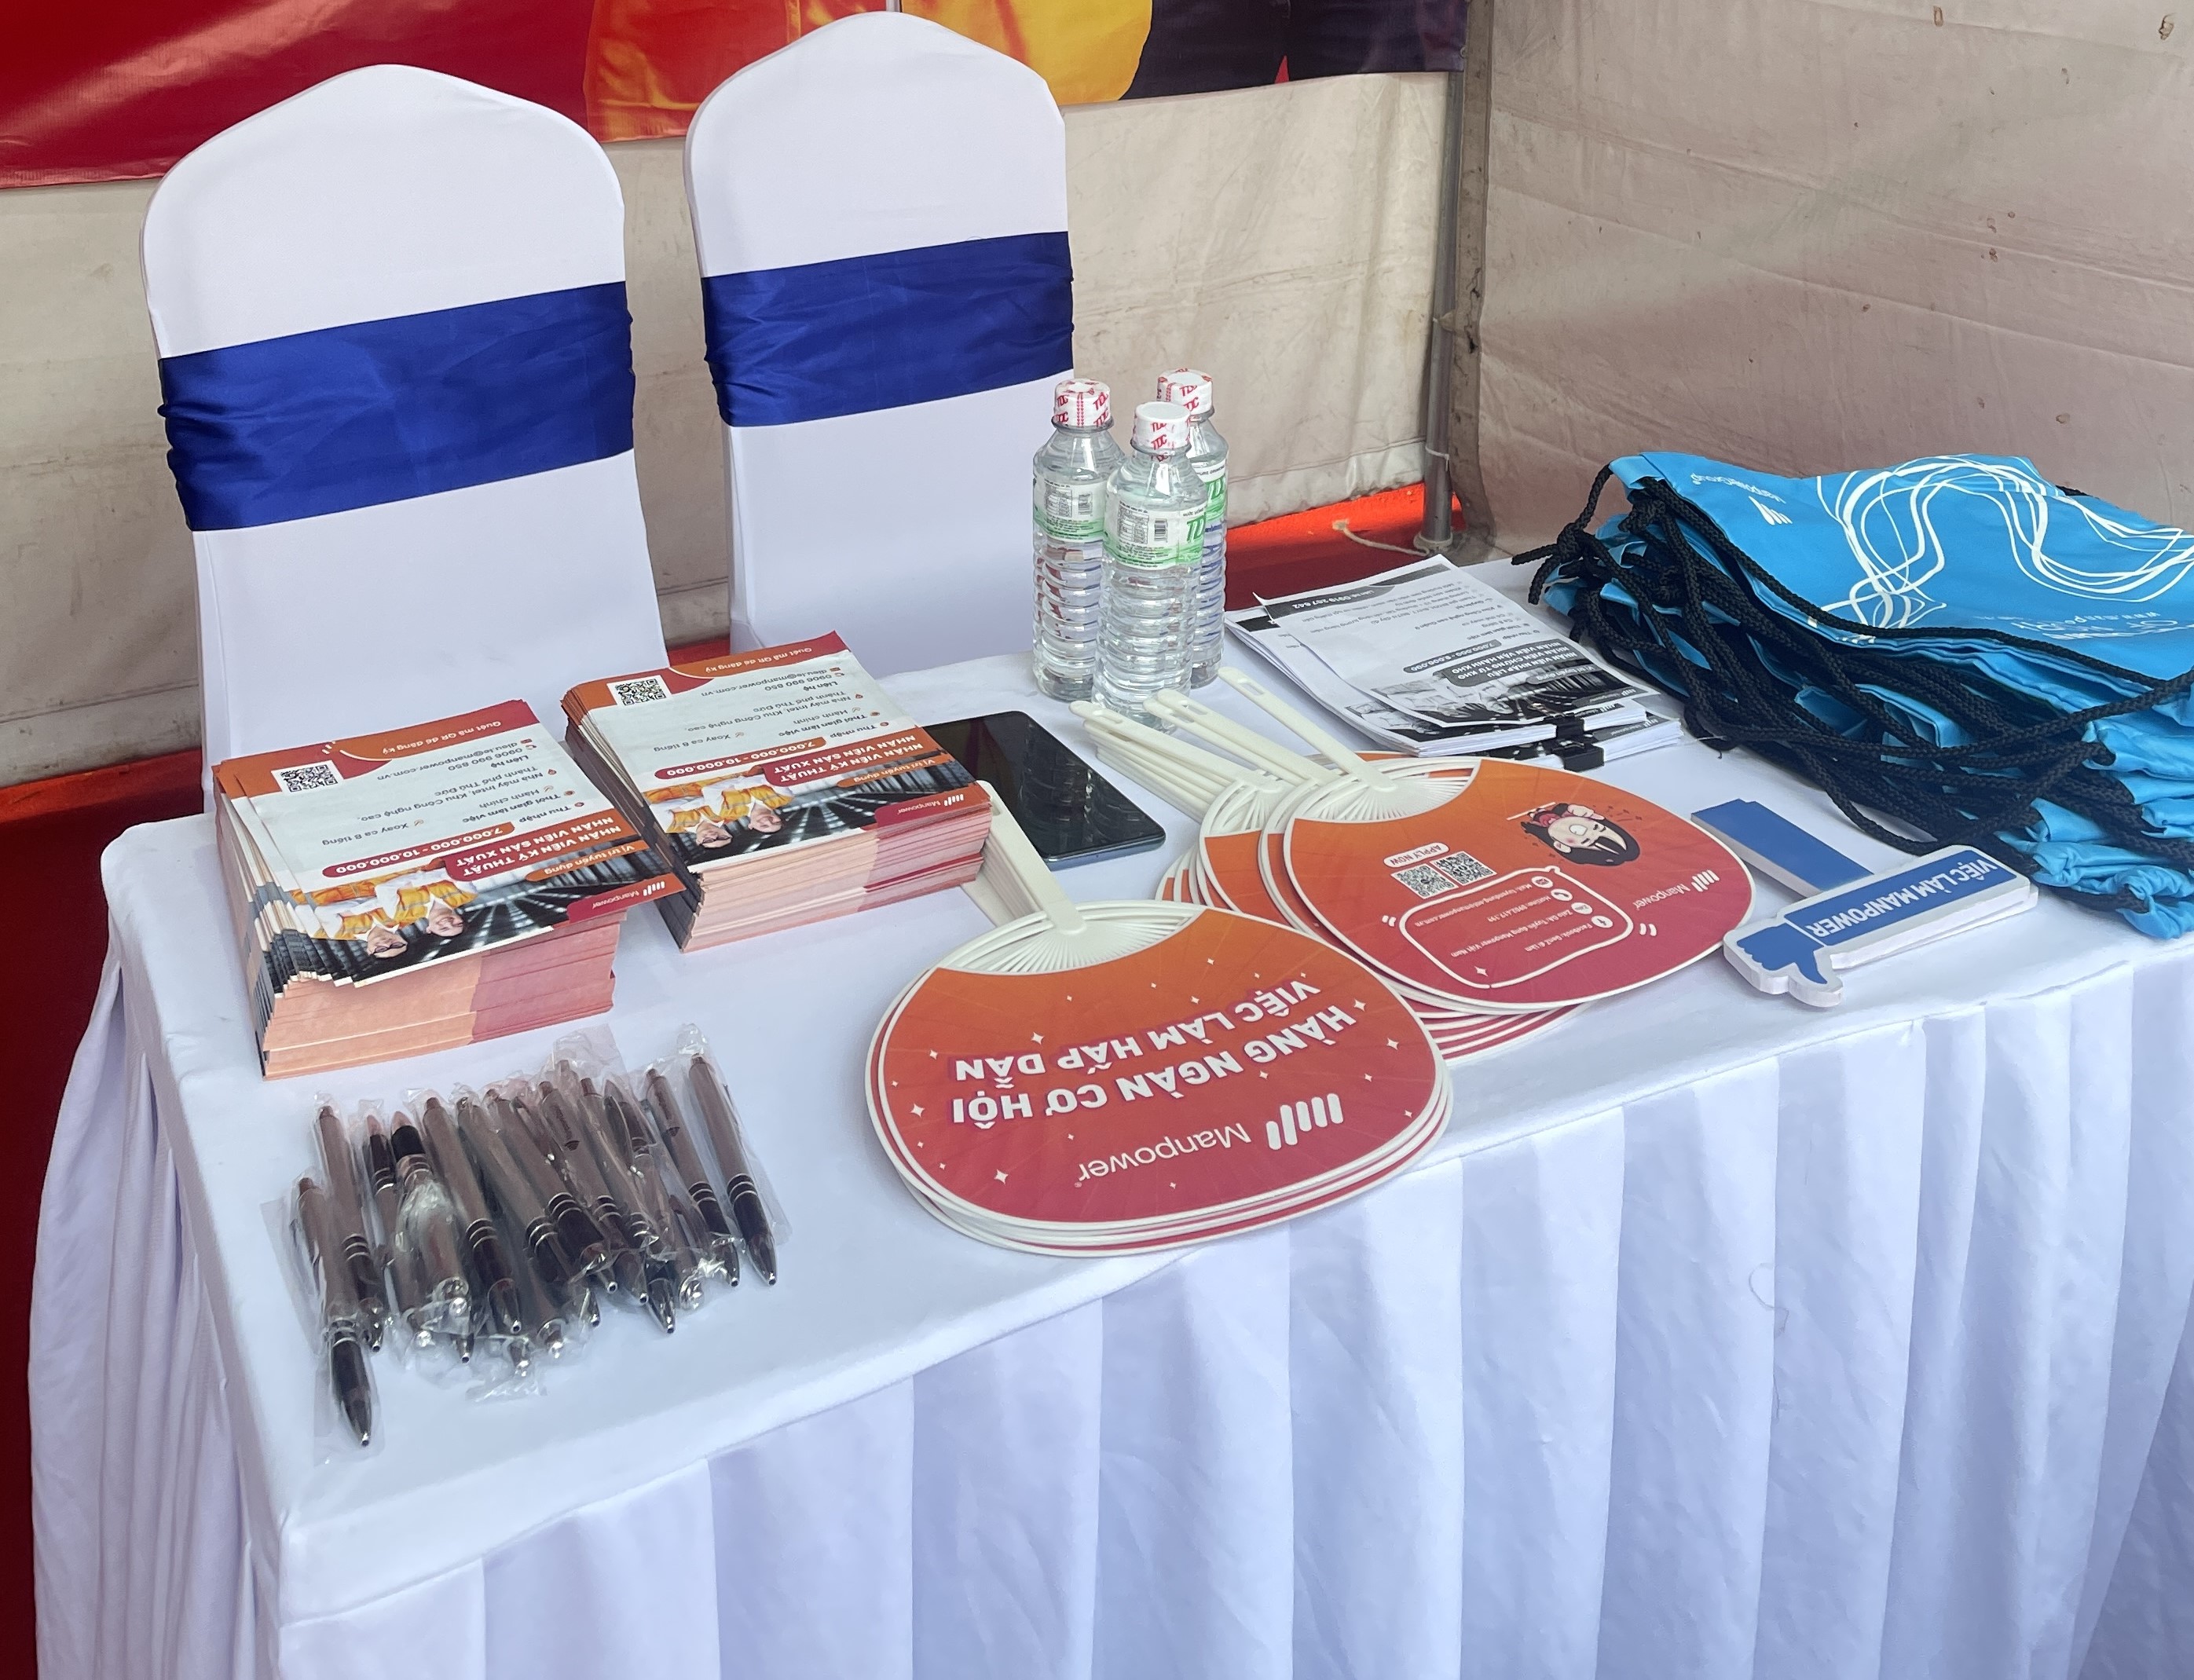 Manpower Vietnam’s flyers and gifts for students at the job fair